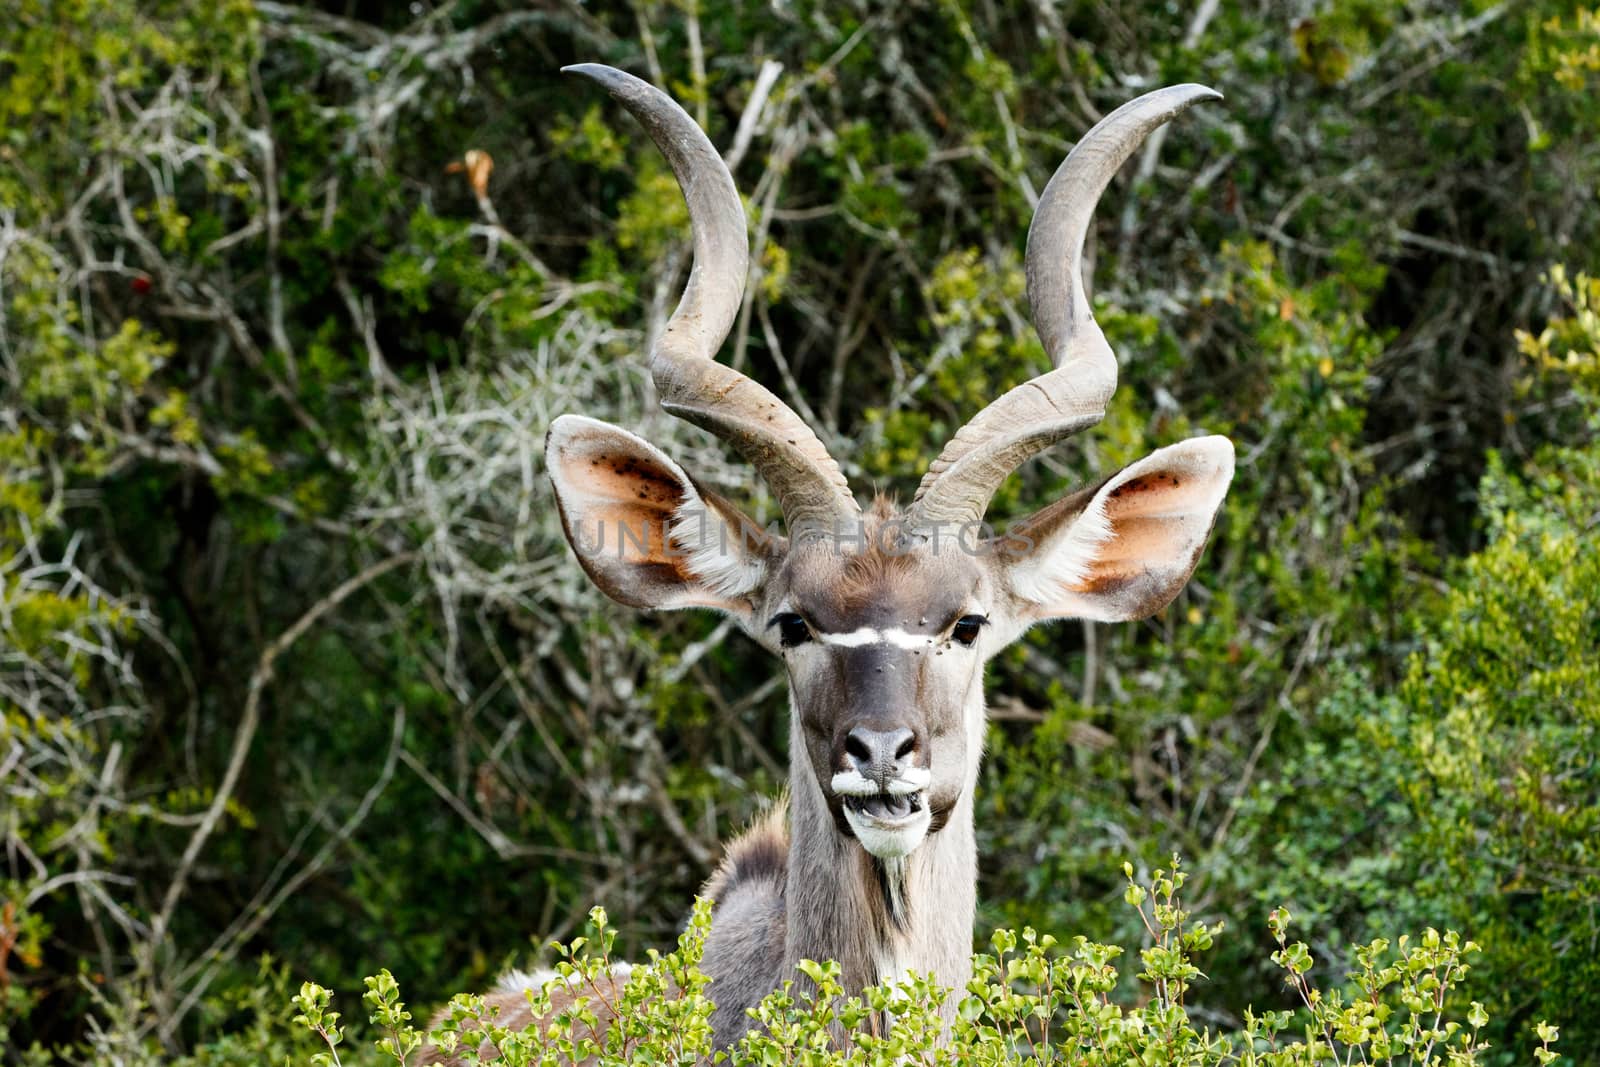 I See You - The Greater Kudu is a woodland antelope found throughout eastern and southern Africa. Despite occupying such widespread territory, they are sparsely populated in most areas.